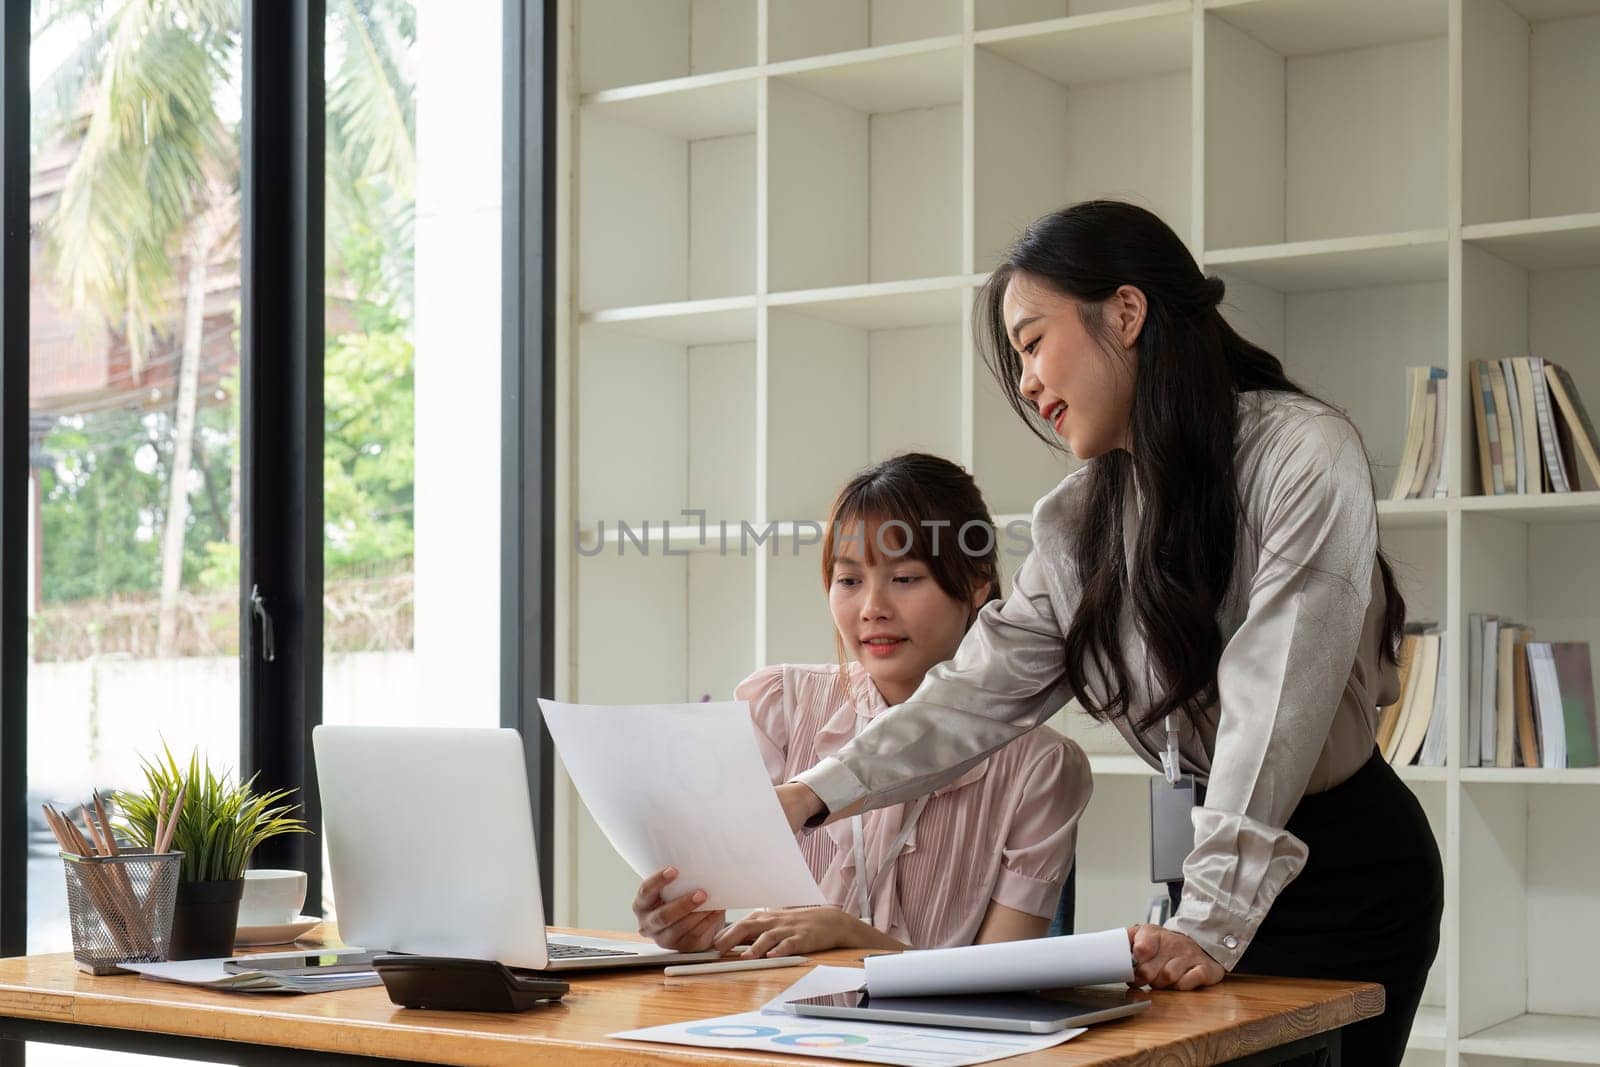 Two businesswoman discussing partner discussing project on laptop in office. Two colleague of professional business people working together at workspace.